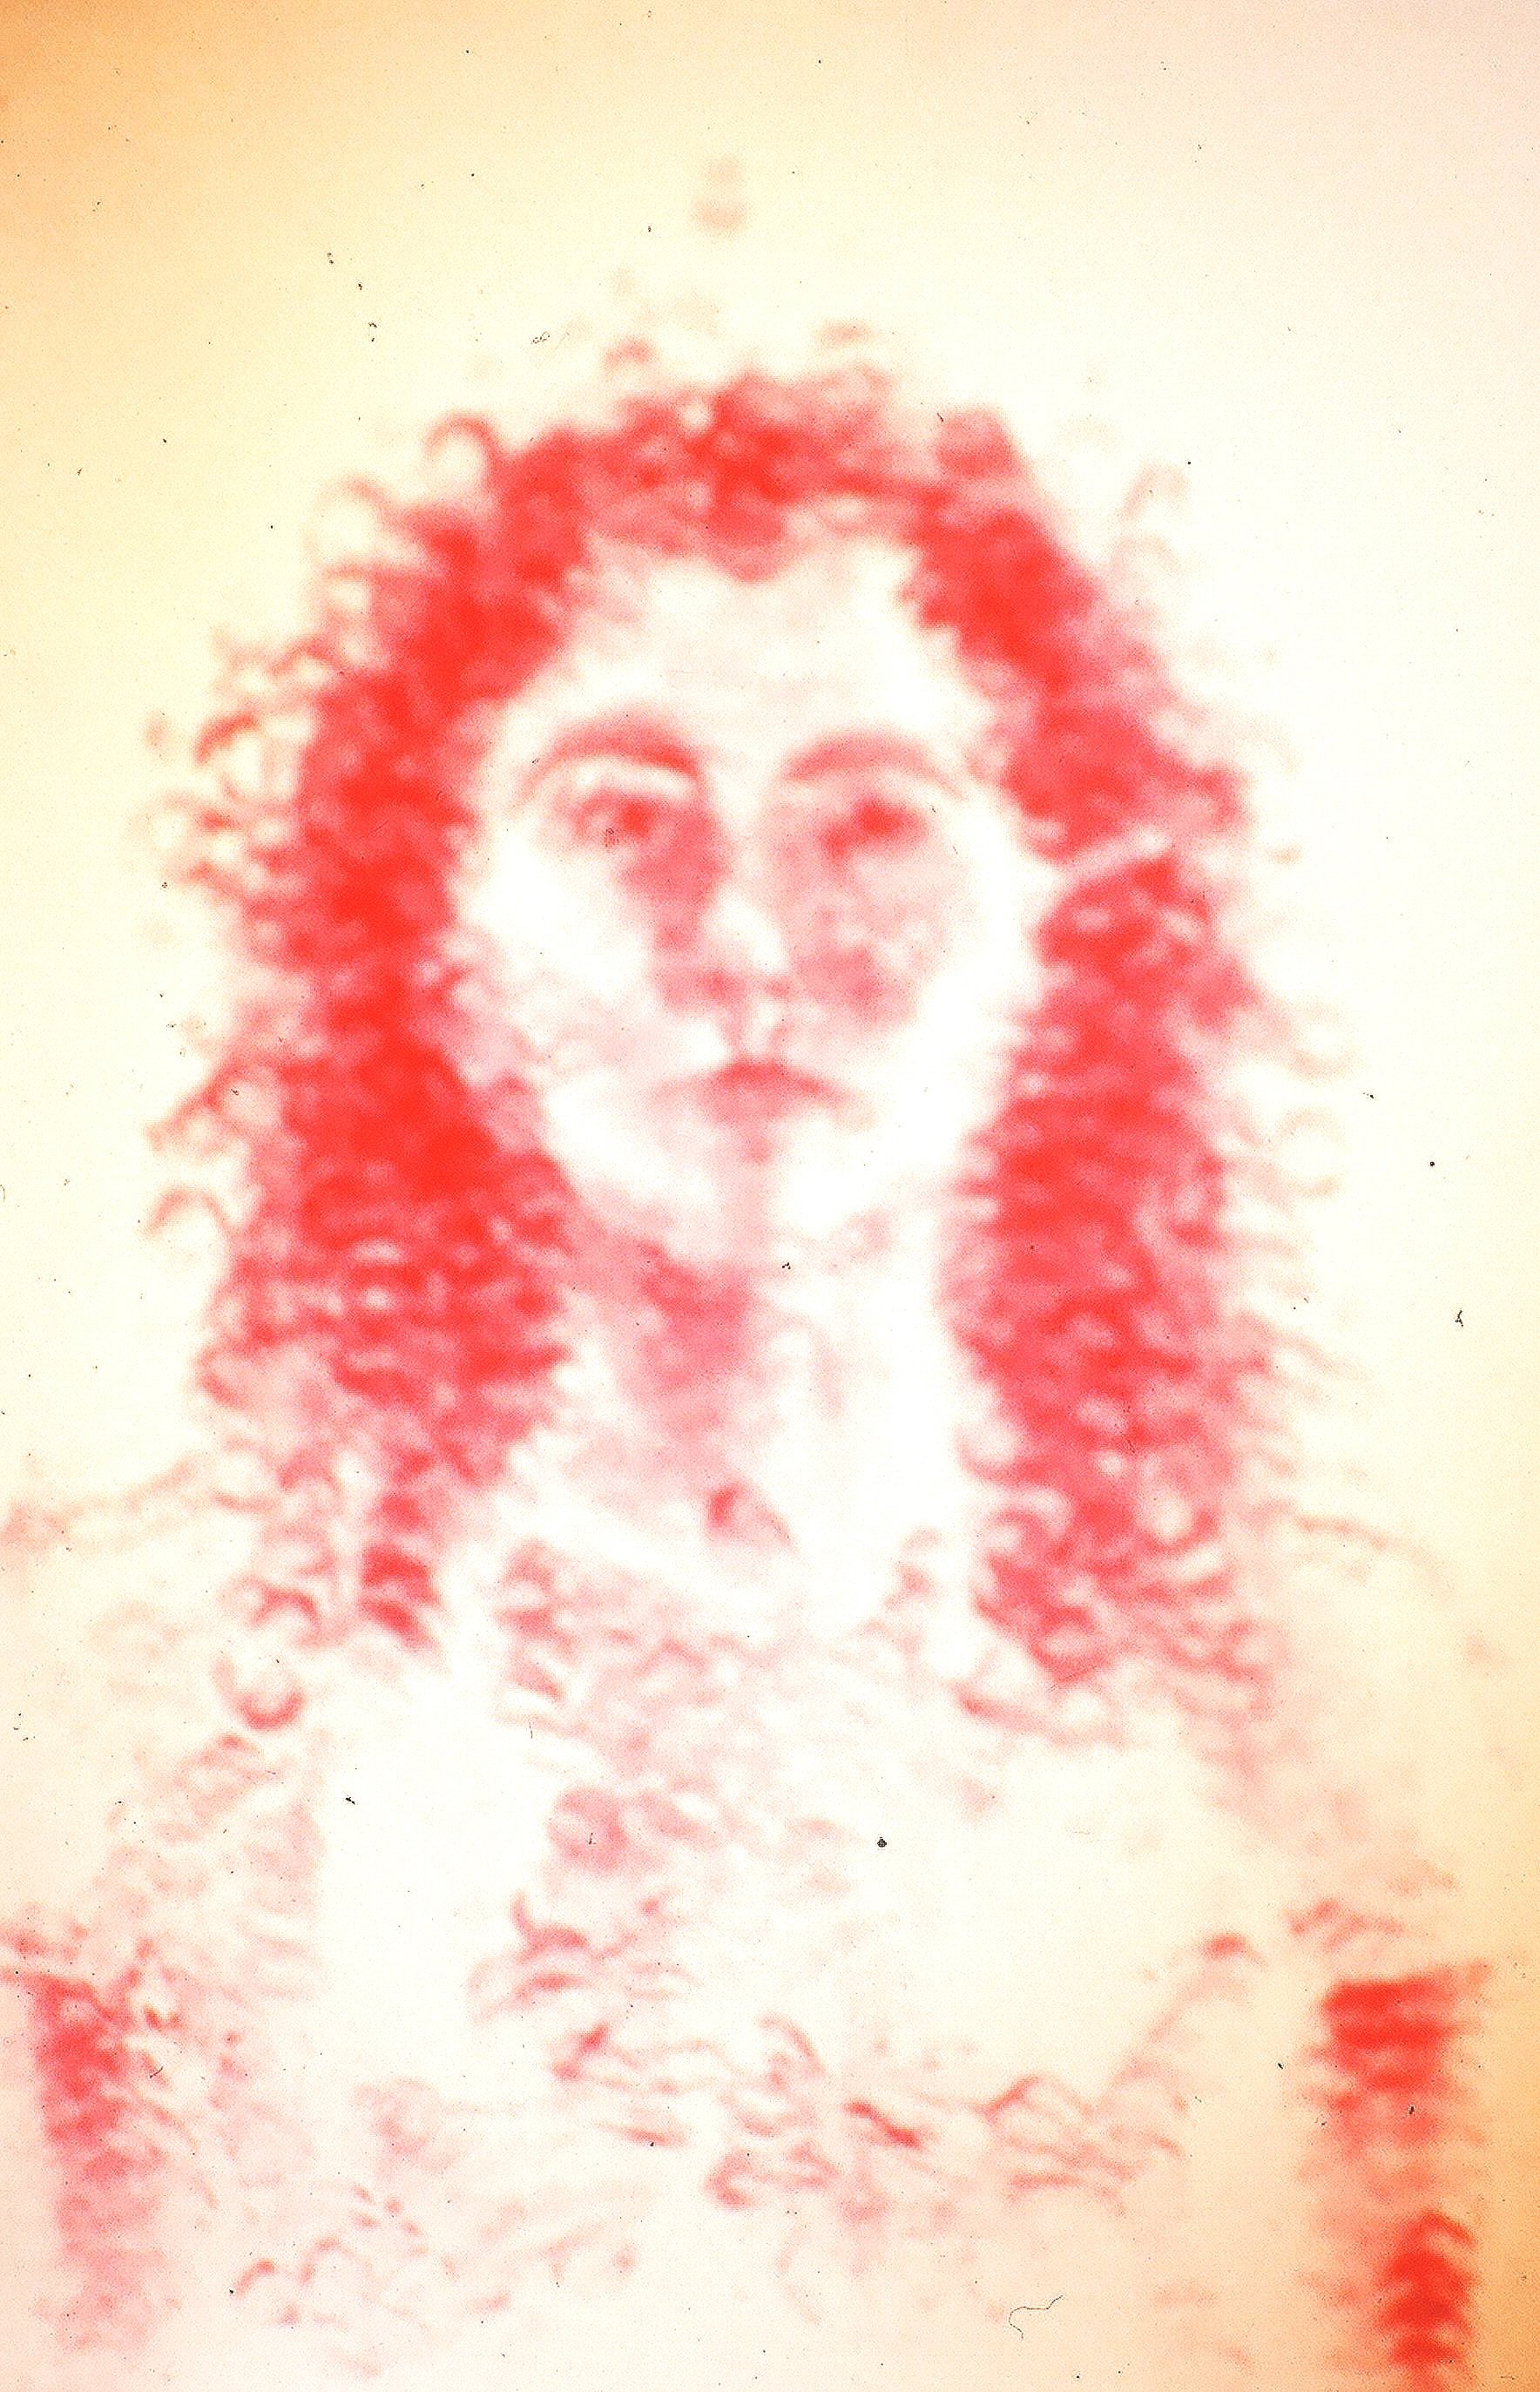 From Lipstick Revolution series, 1999 (blurry image)